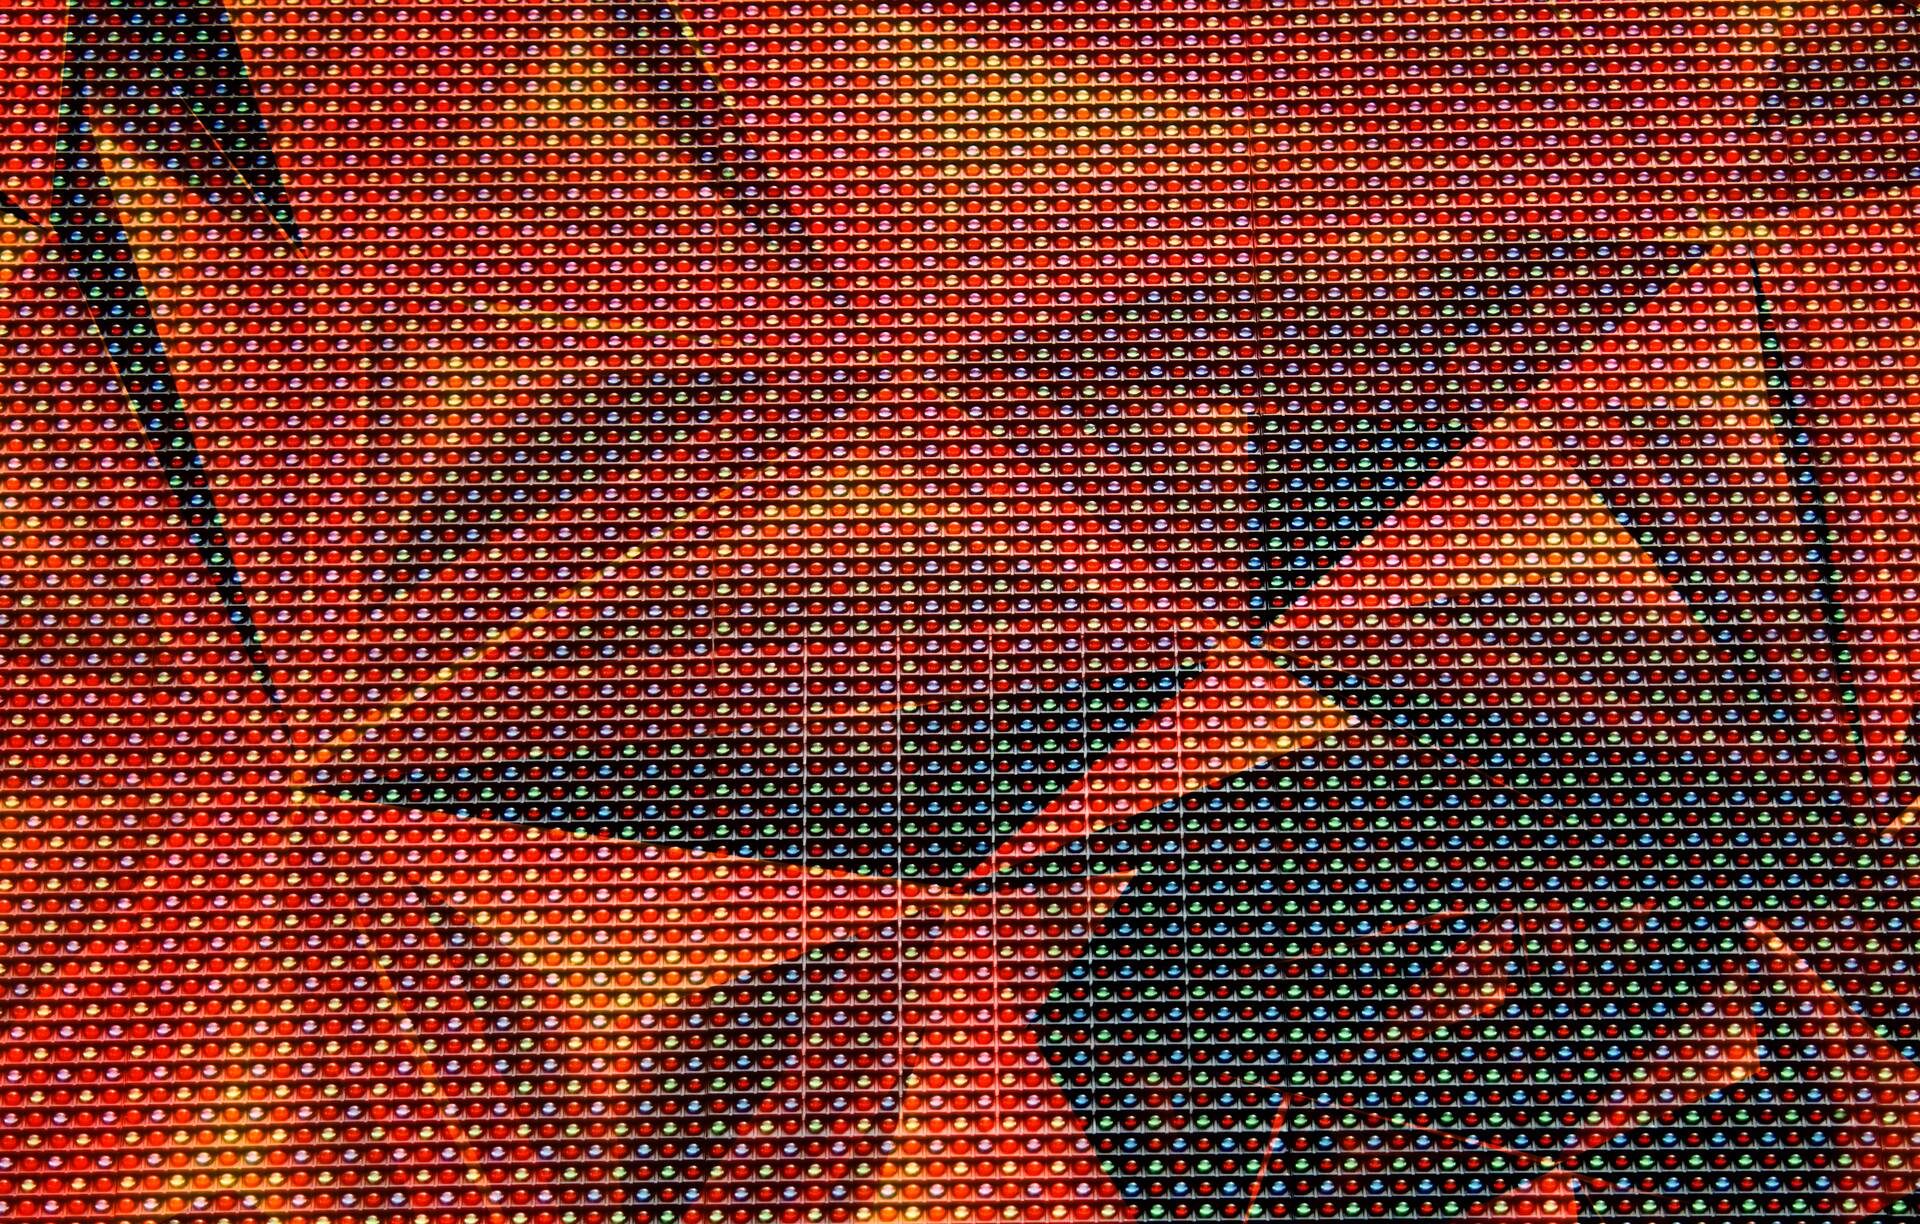 Free picture (Polygonal red metal texture LED screen.) from https://torange.biz/fx/texture-overlay-polygonal-red-metal-led-207754